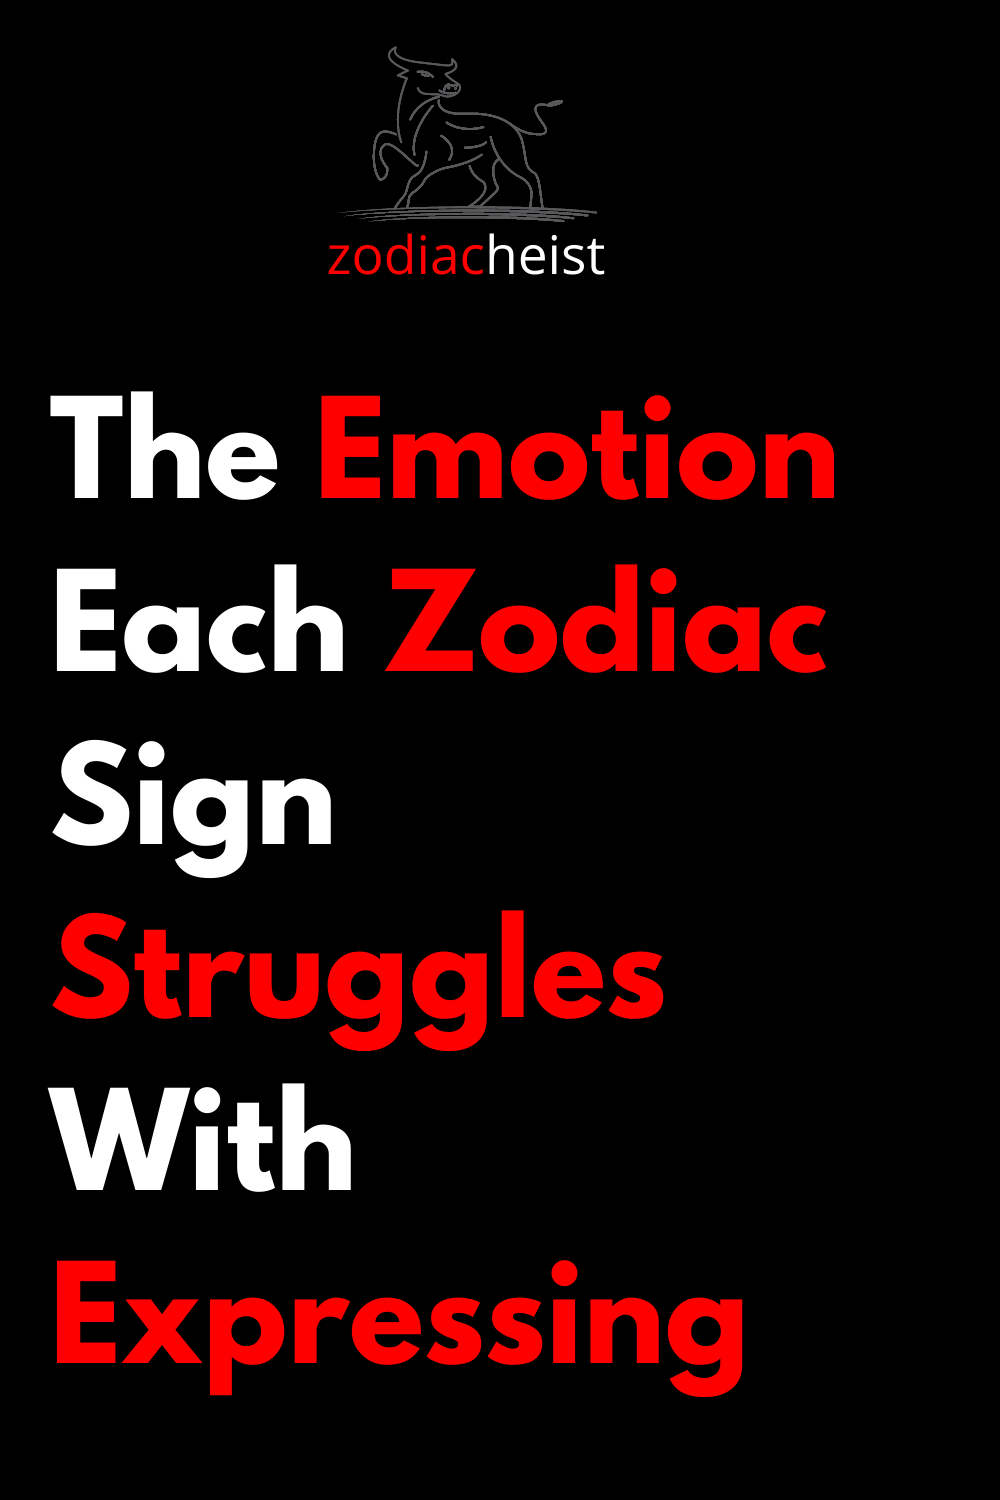 The Emotion Each Zodiac Sign Struggles With Expressing